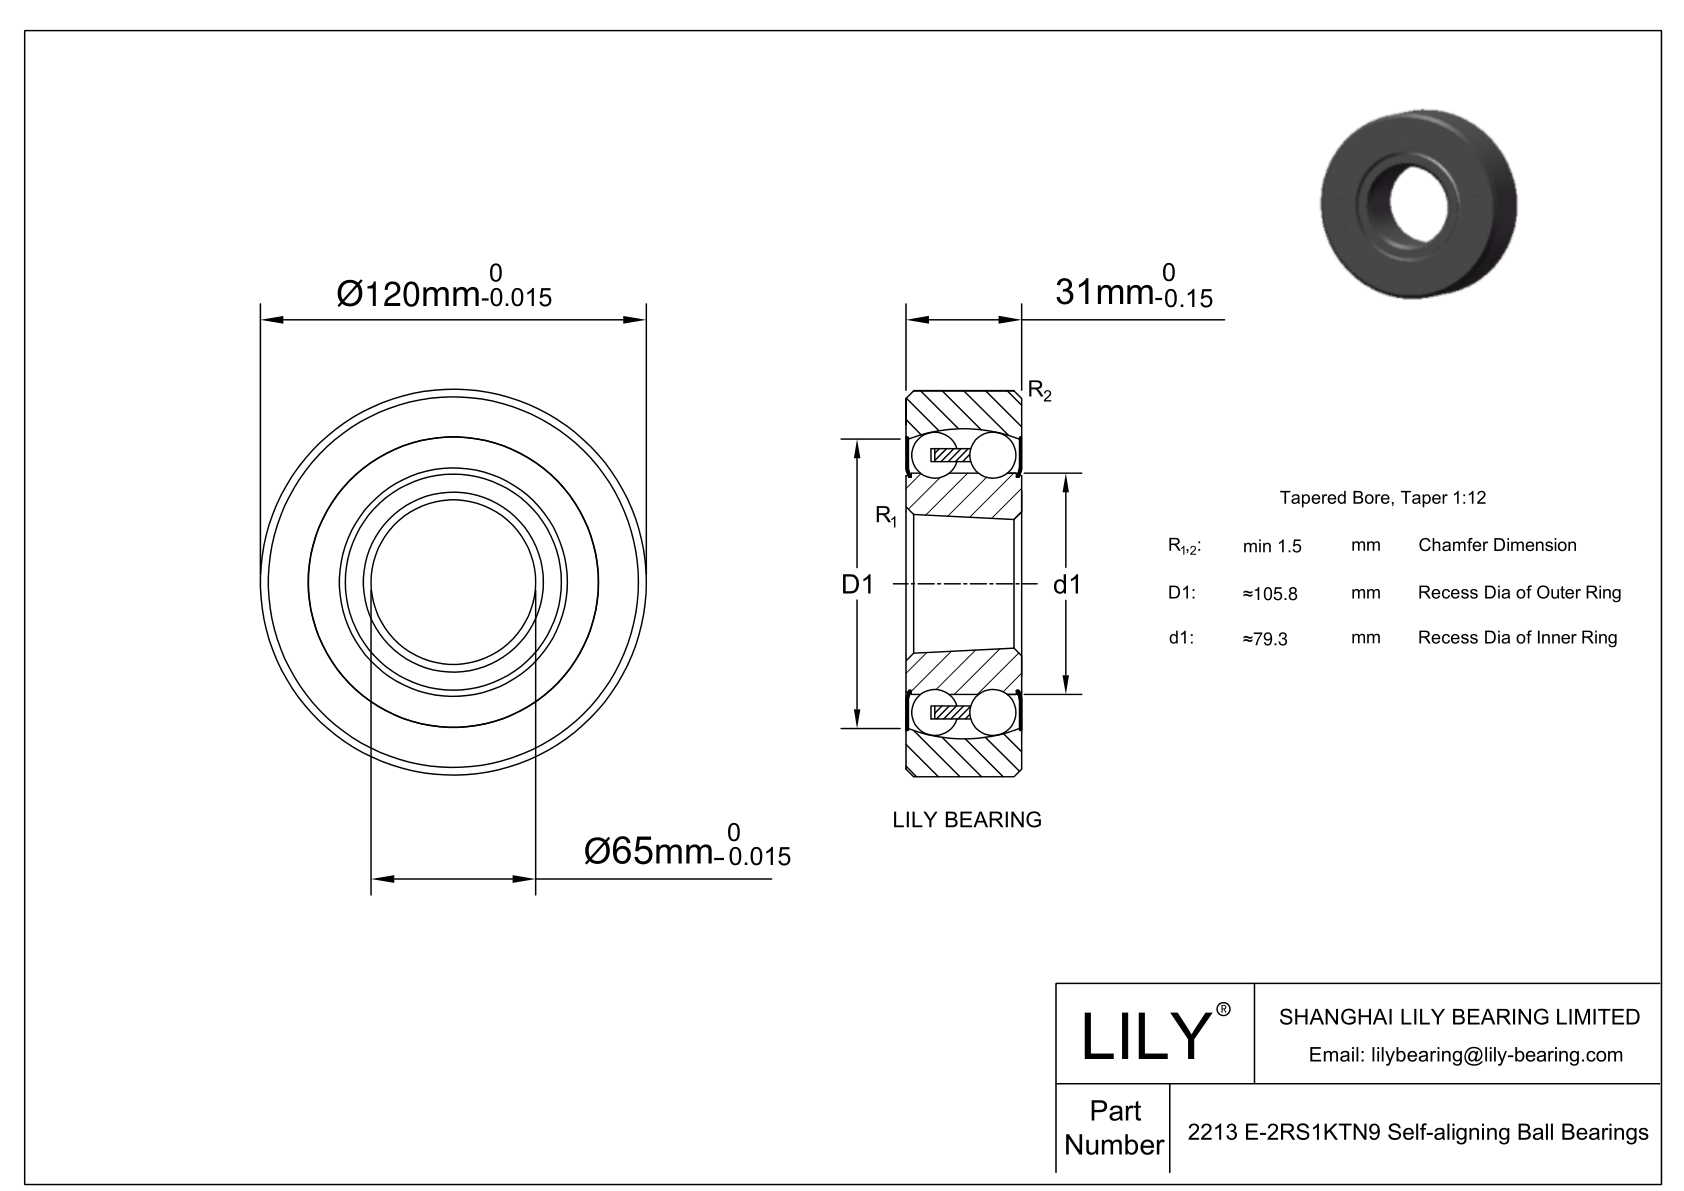 CE2213 E-SIPP Silicon Nitride Self Aligning Ball Bearings cad drawing